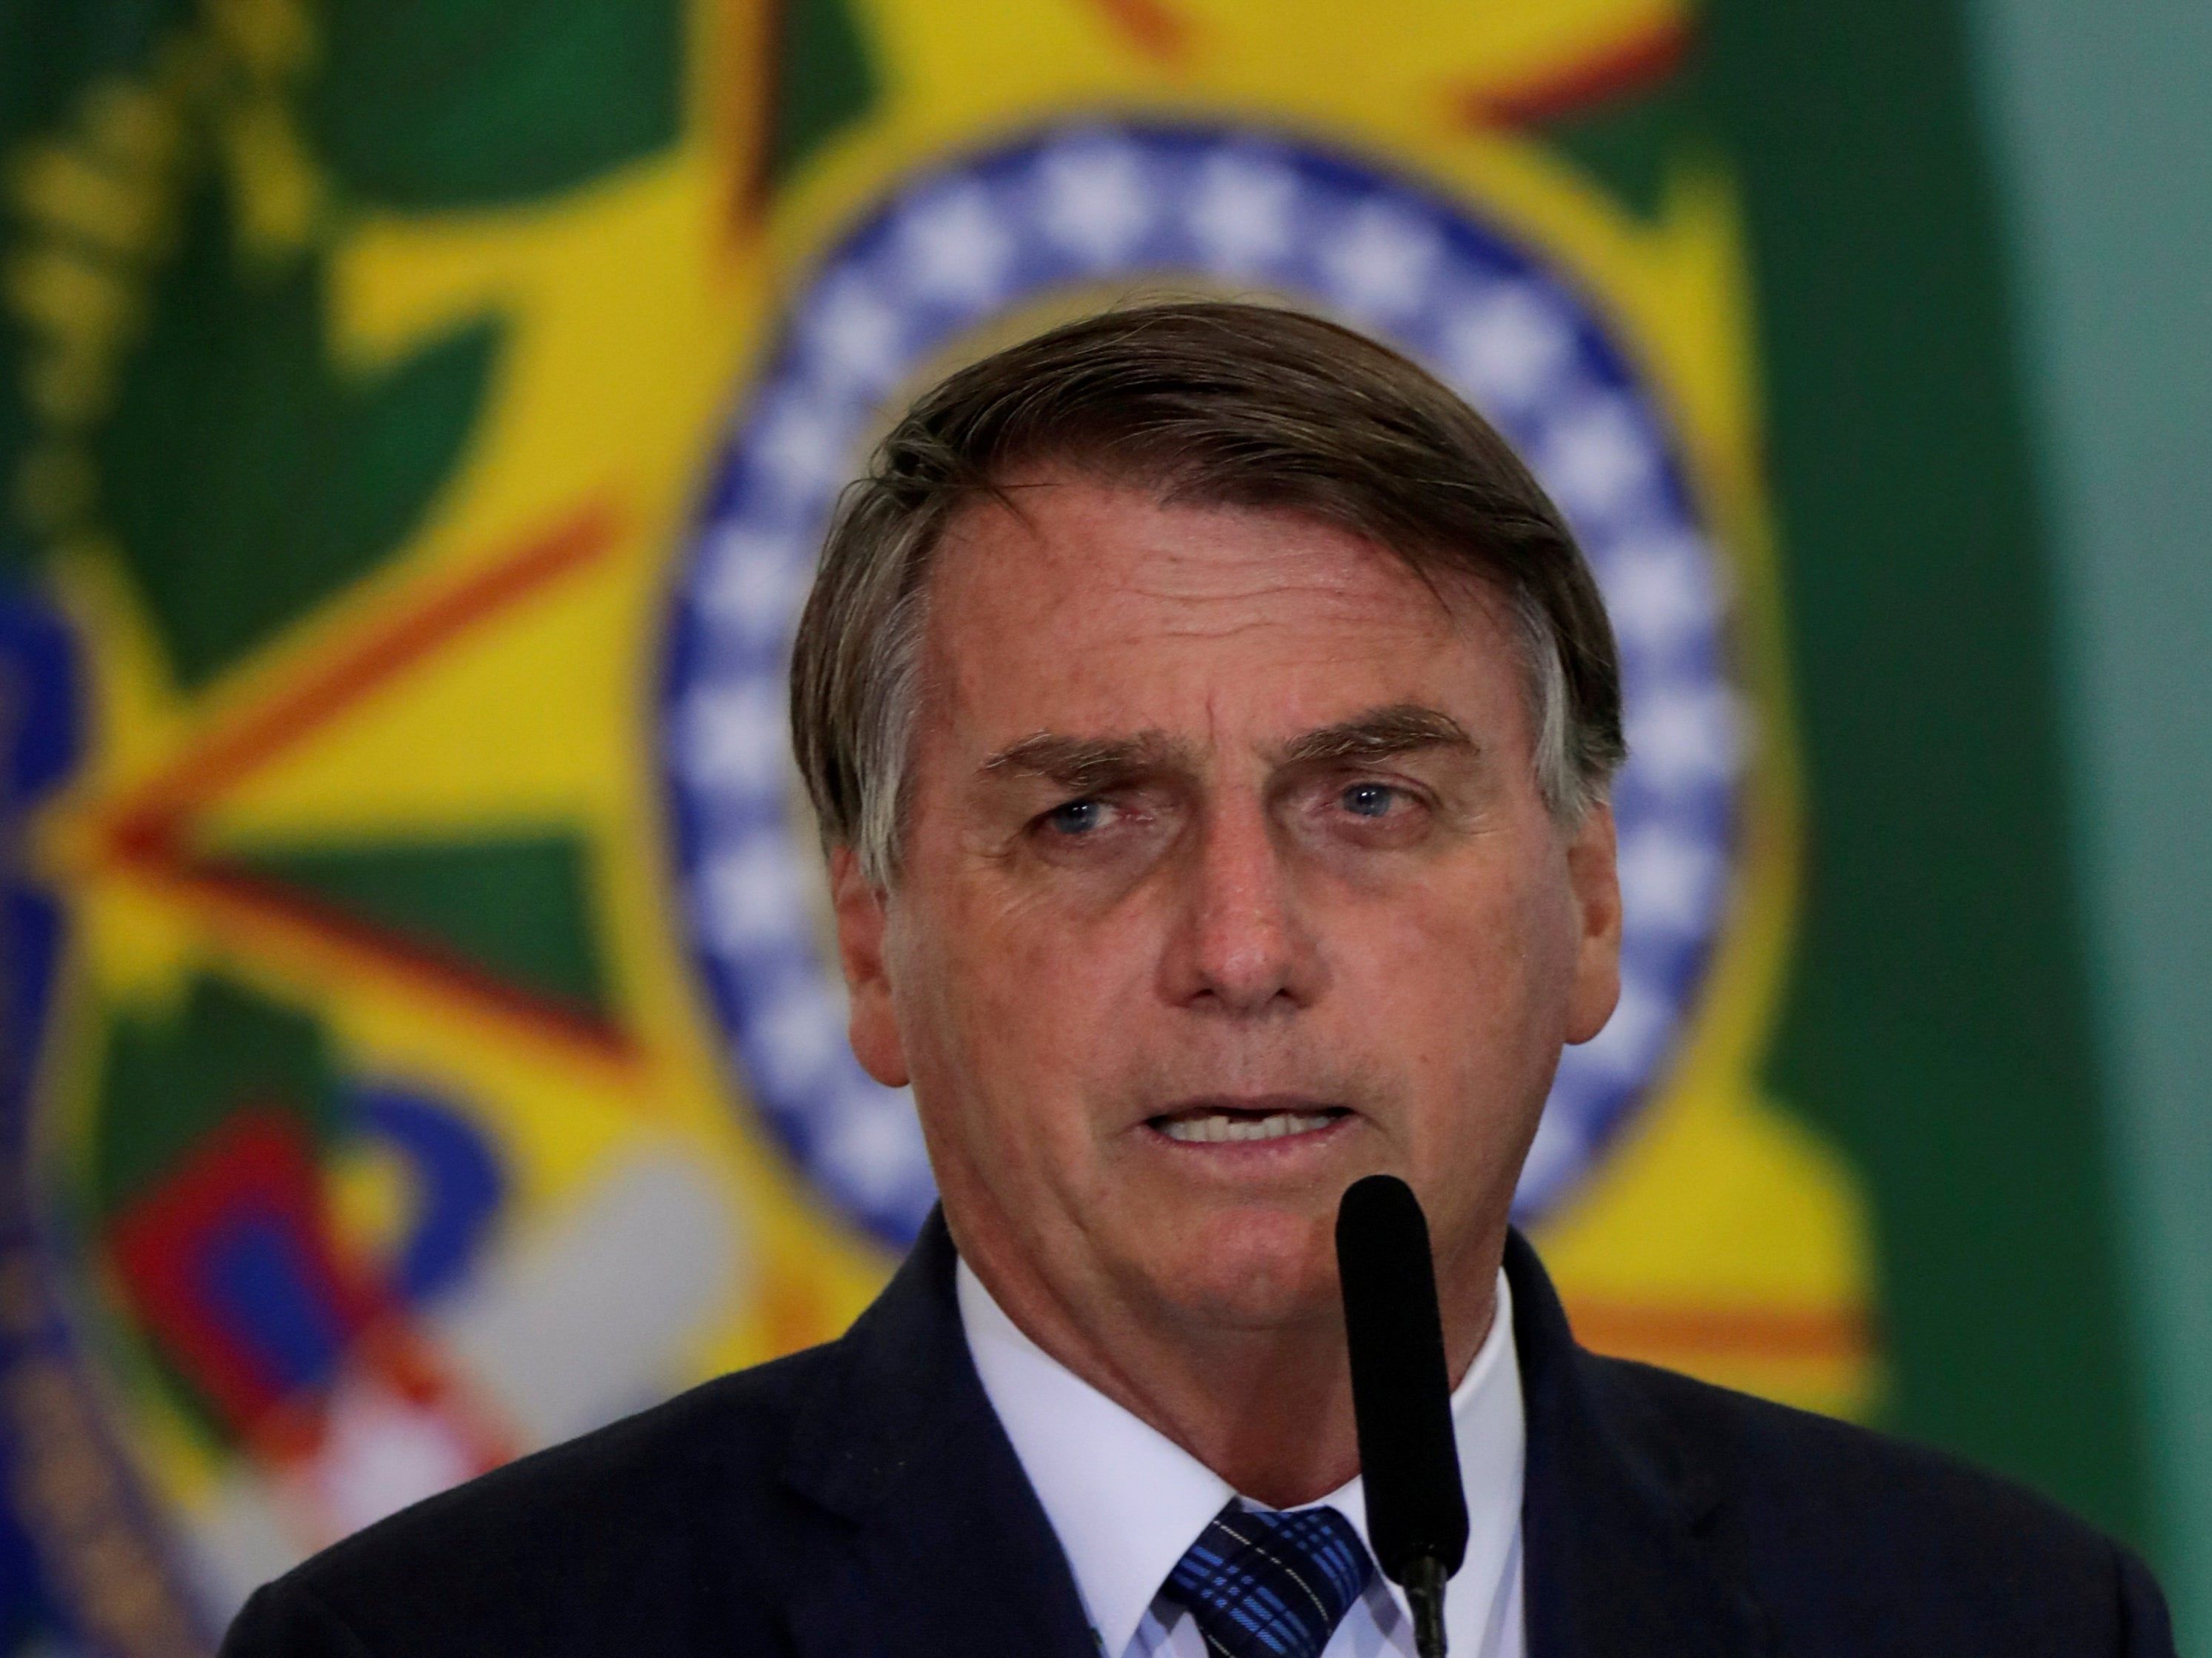 Brazillian president Jair Bolsonaro is is attempting to push through a suite of land regulation bills that could put millions of hectares of public land in the Amazon at risk, campaigners say